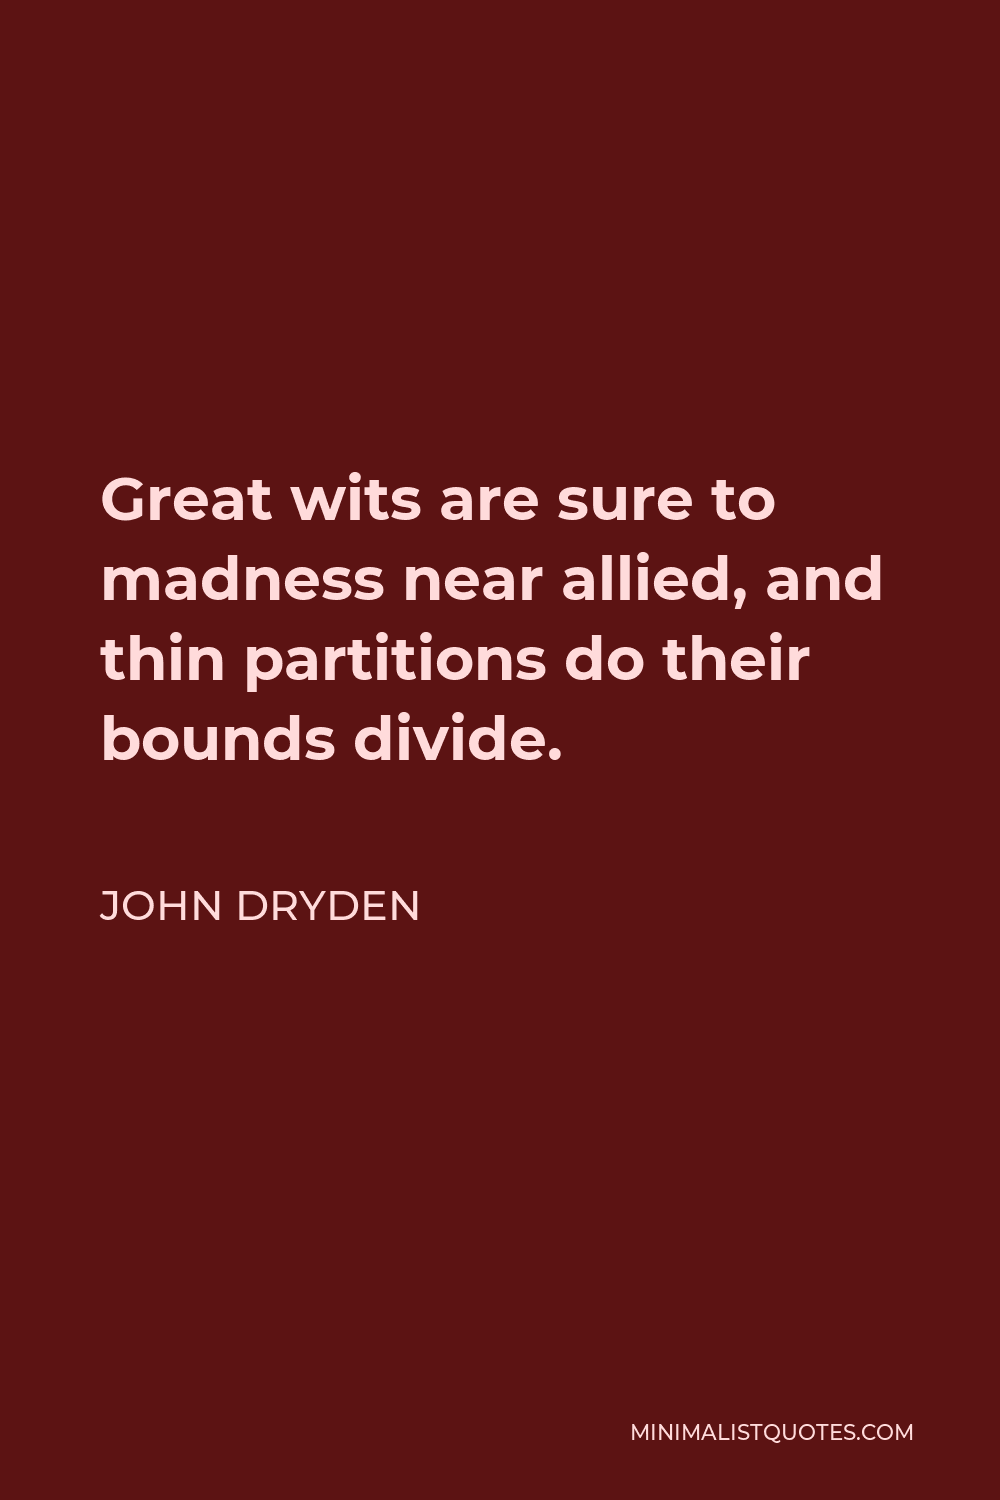 John Dryden Quote - Great wits are sure to madness near allied, and thin partitions do their bounds divide.